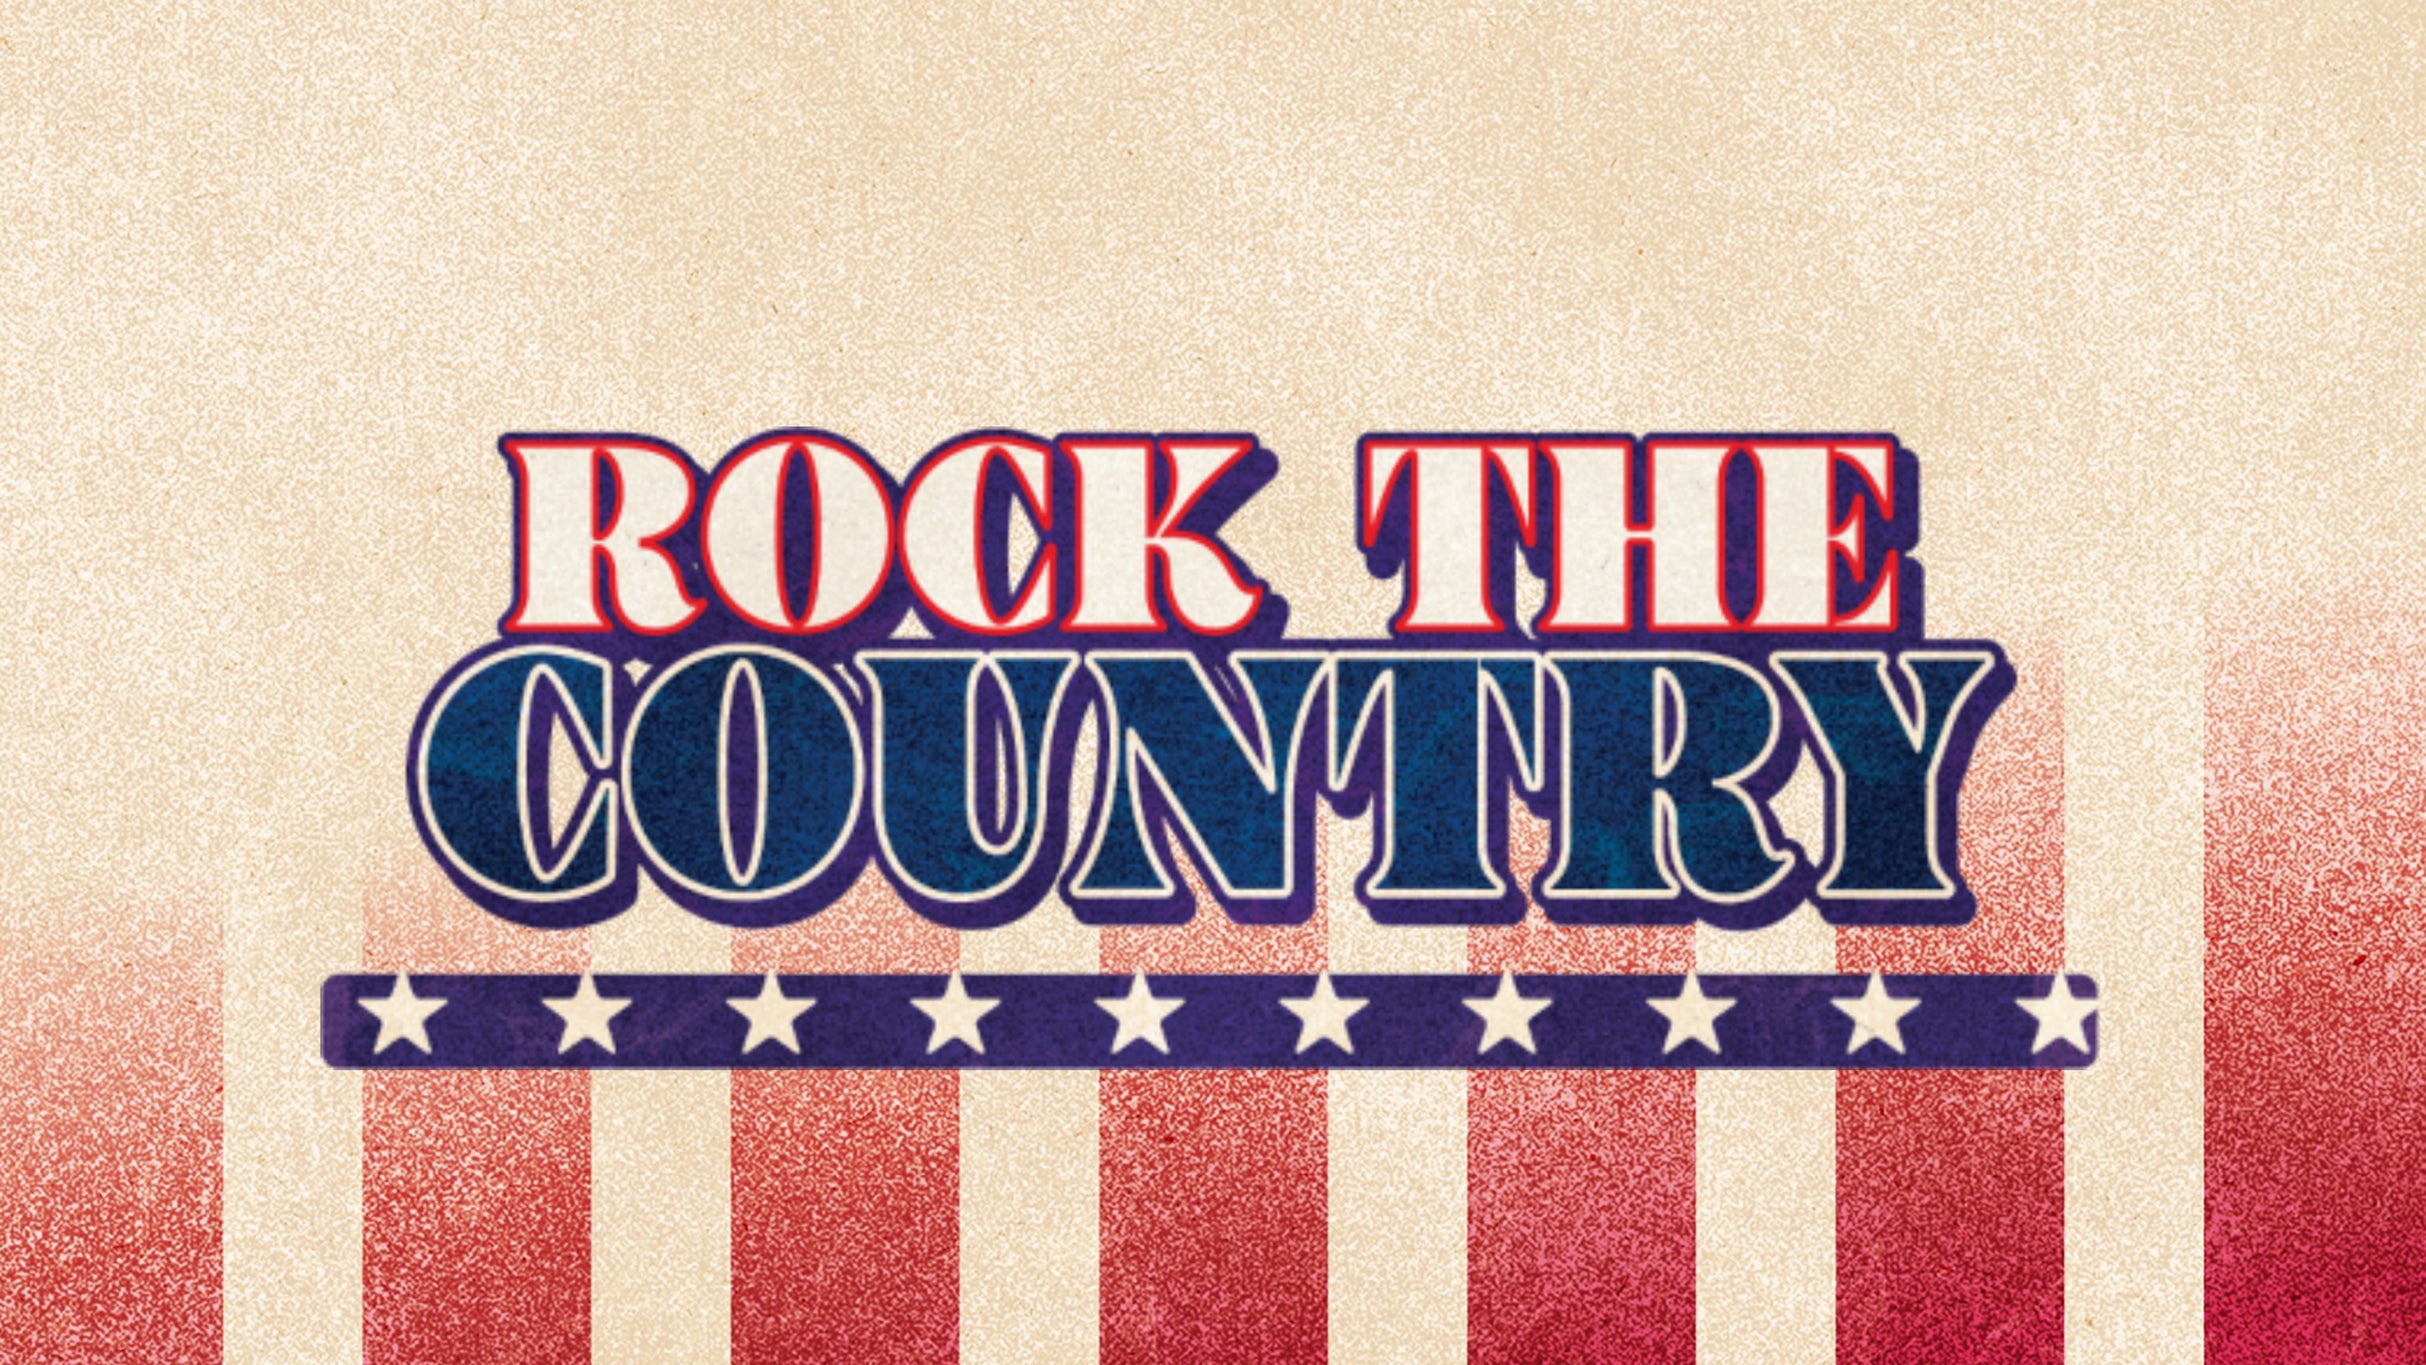 Rock The Country - Mobile, AL at The Grounds